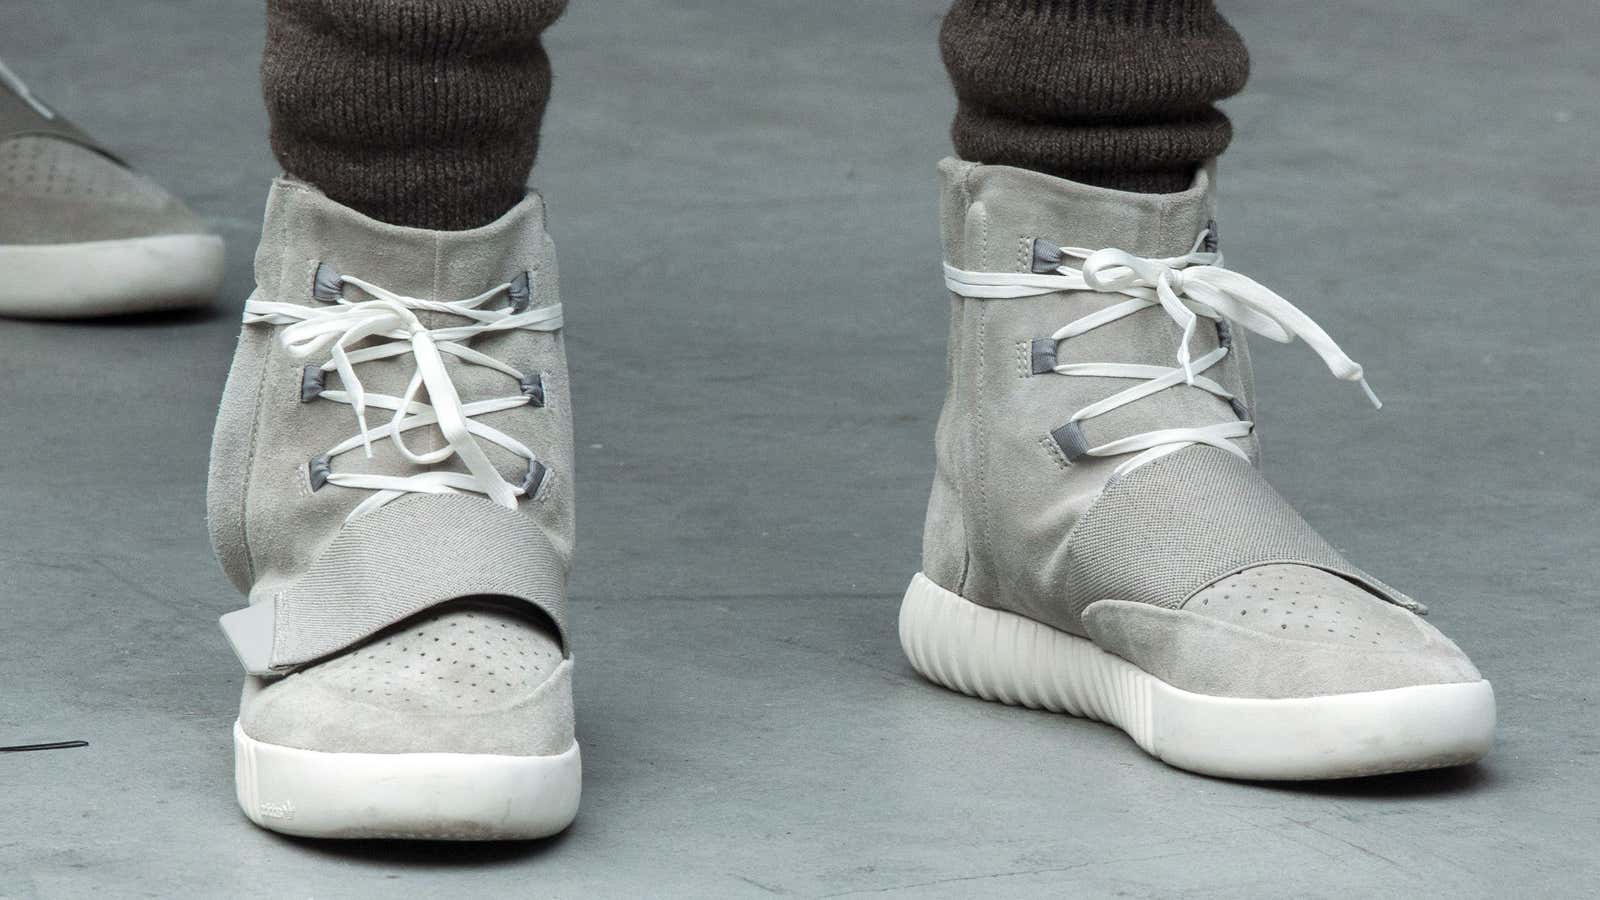 Kanye’s Yeezy 750 Boosts  will not bring down Nike.